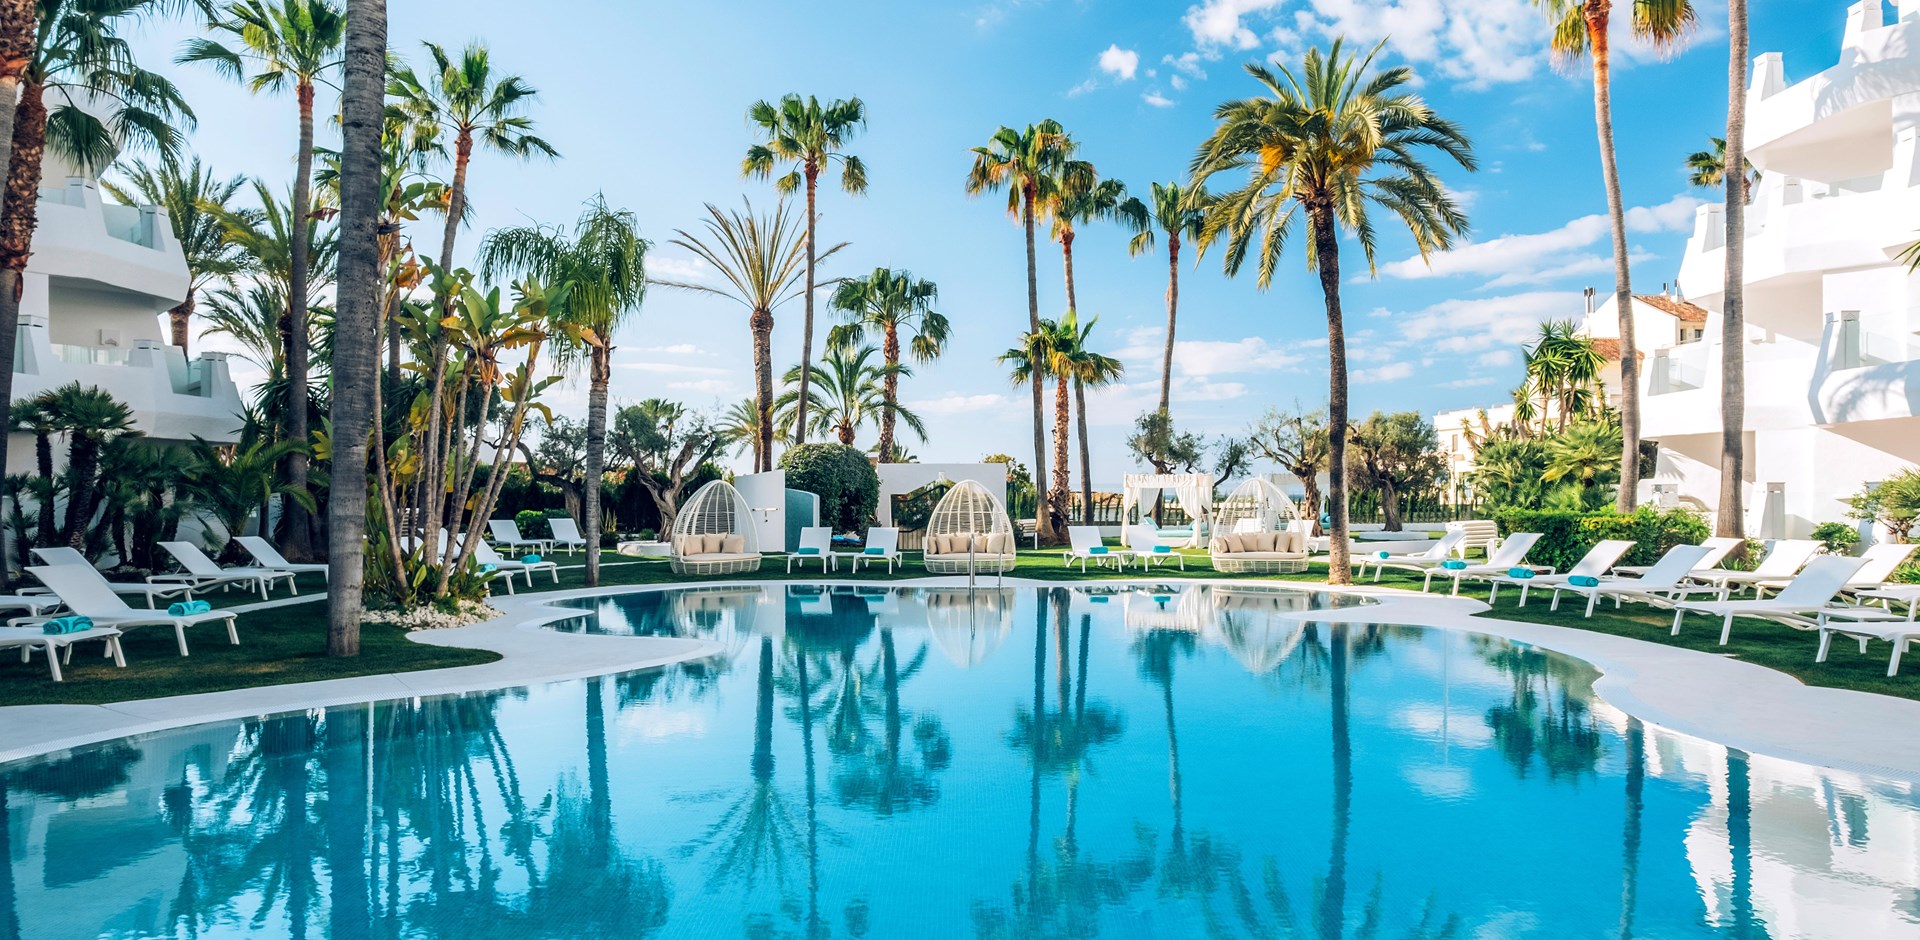 a group of palm trees next to a pool of water